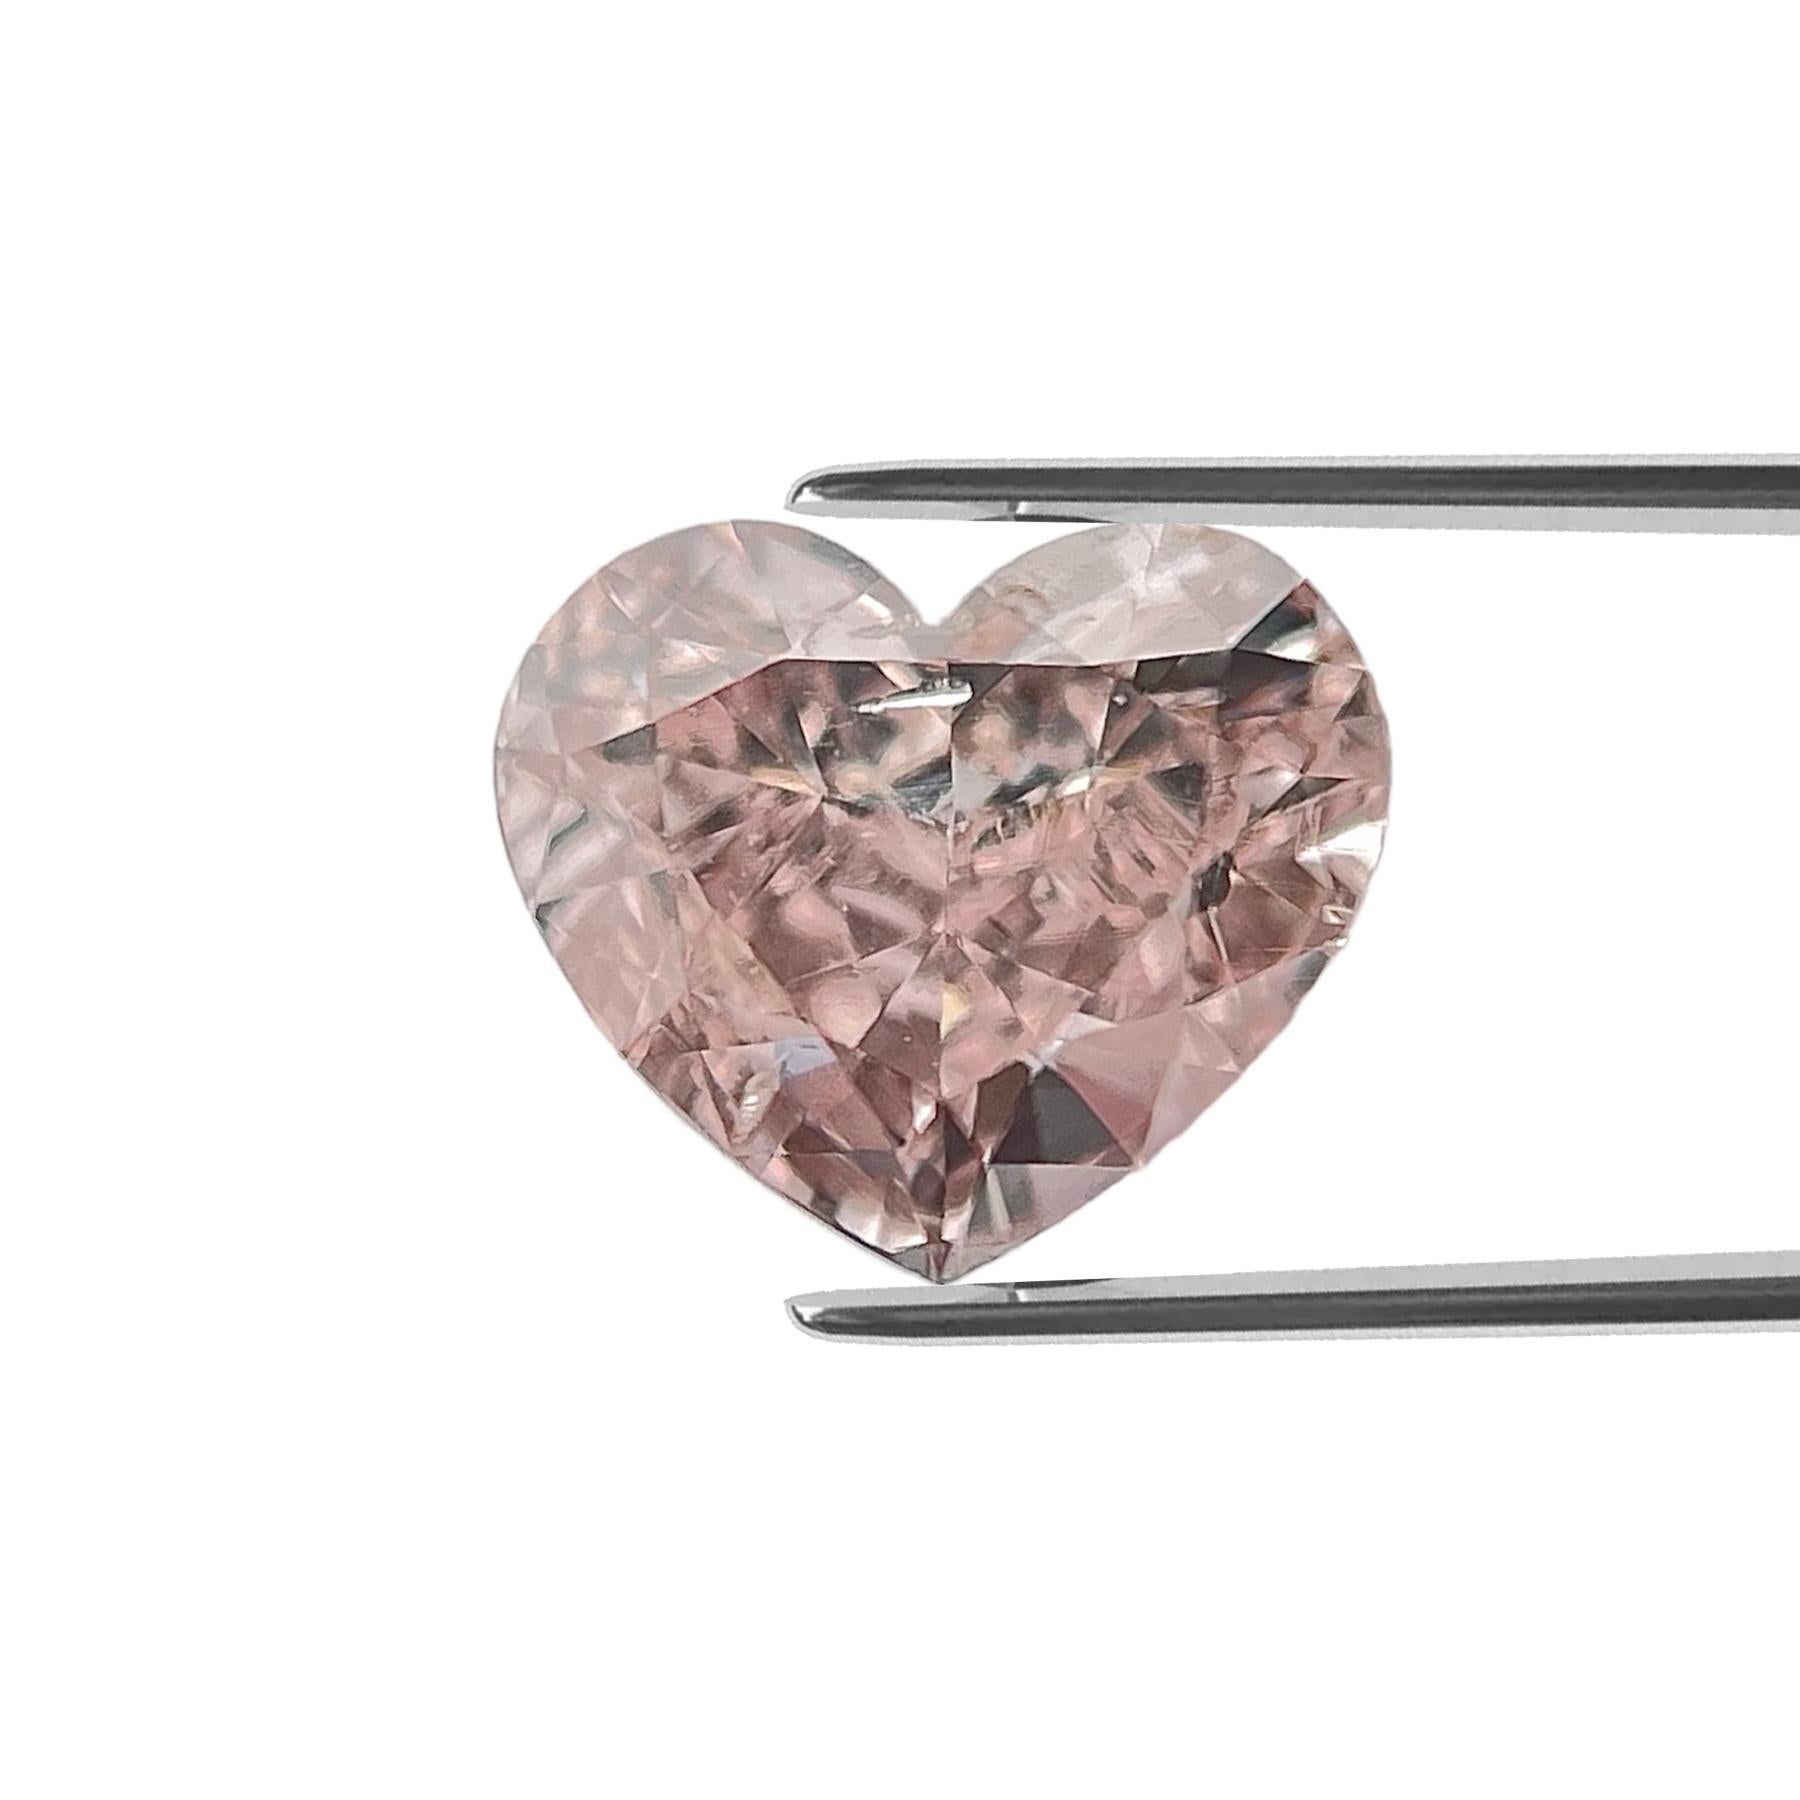 ITEM DESCRIPTION

ID #: NYC57370
Stone Shape: HEART MODIFIED BRILLIANT
Diamond Weight: 0.43ct
Clarity: SI2
Color: Fancy Pink Brown
Cut:	Excellent
Measurements: 4.57 x 5.40 x 2.49 mm
Symmetry: Very Good
Polish: Very Good
Fluorescence: None
Certifying